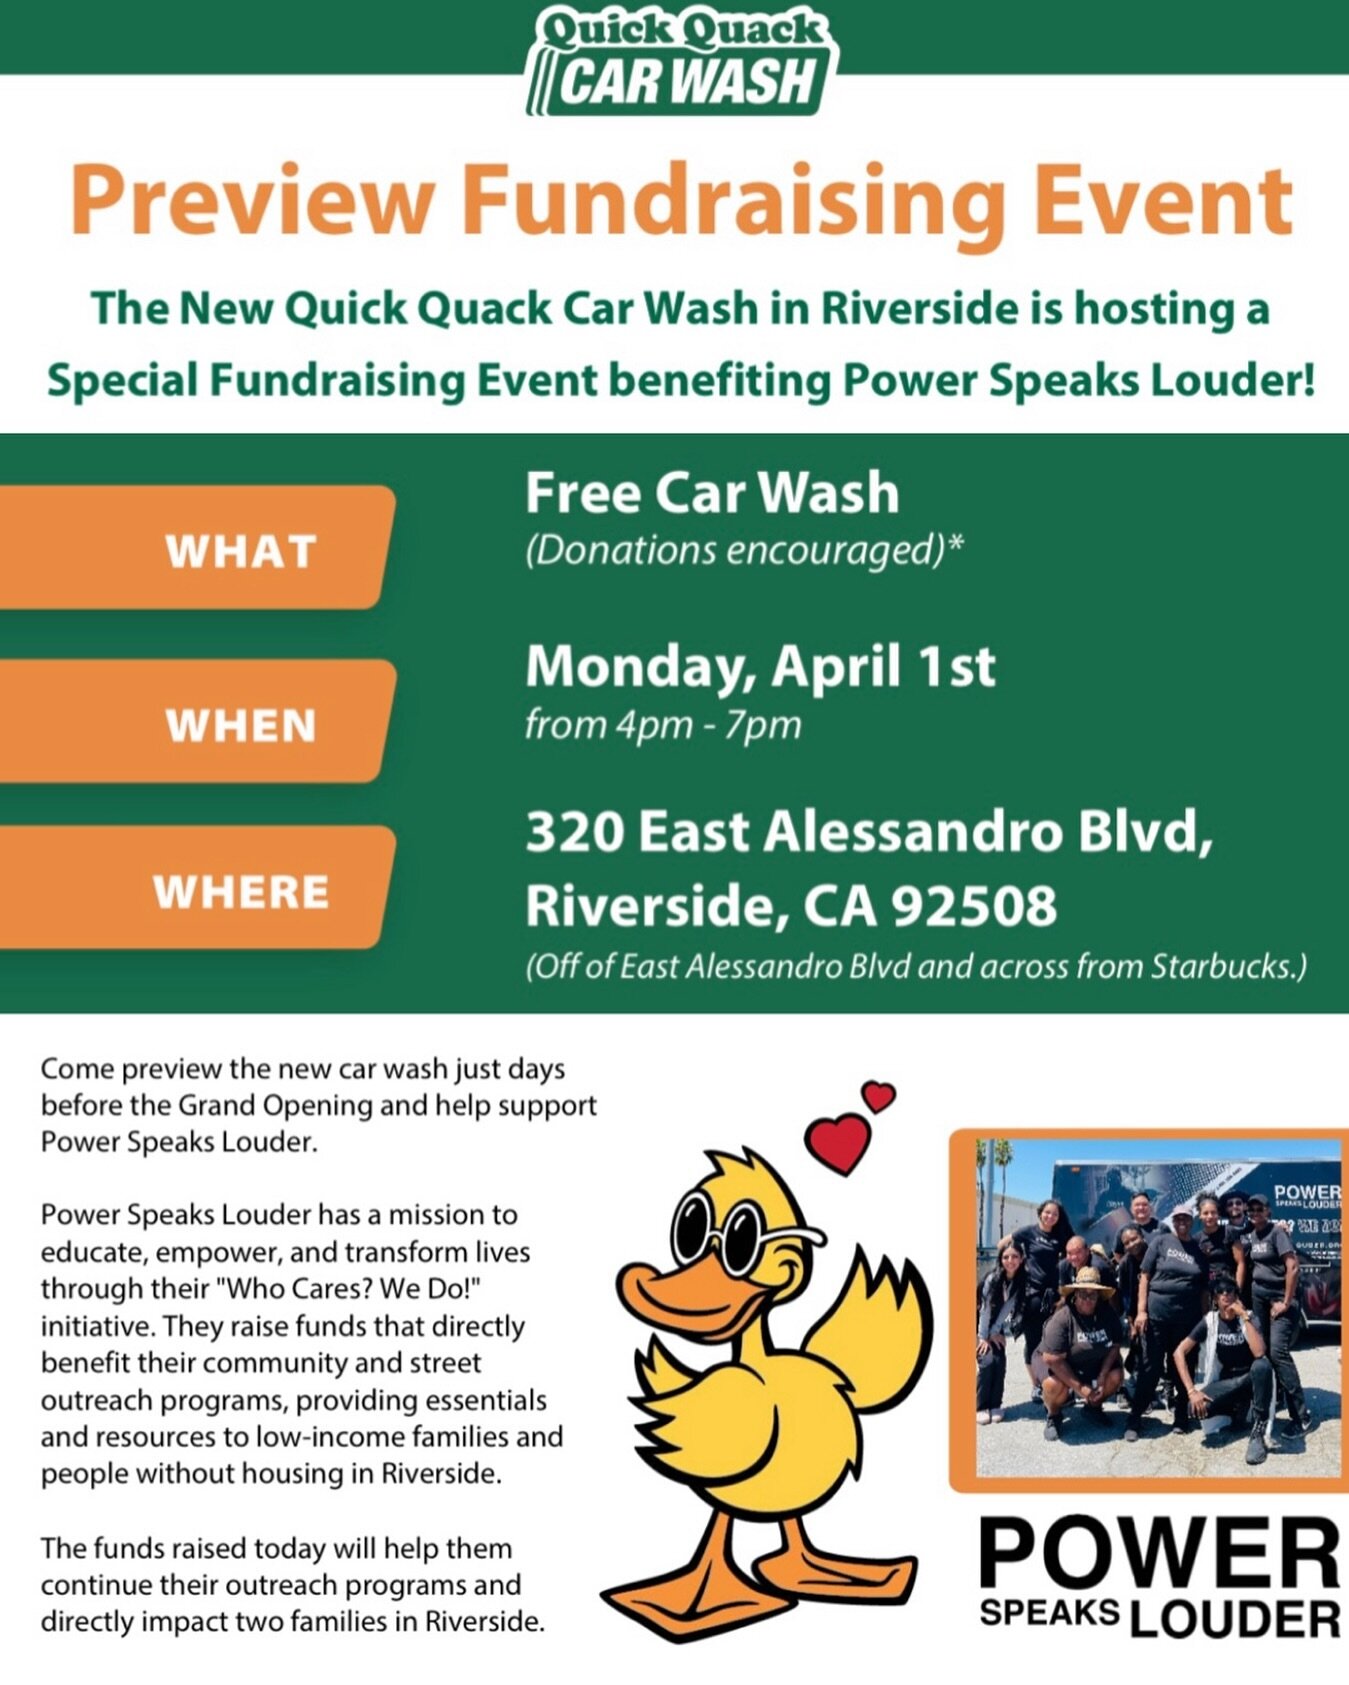 Save the date to receive a FREE CAR WASH at our Quick Quack Car Wash fundraiser in Riverside on Monday, April 1st from 4pm-7pm! Show your support and double your impact as @quickquackcarwash will match every dollar donated to PSL during this time! Th